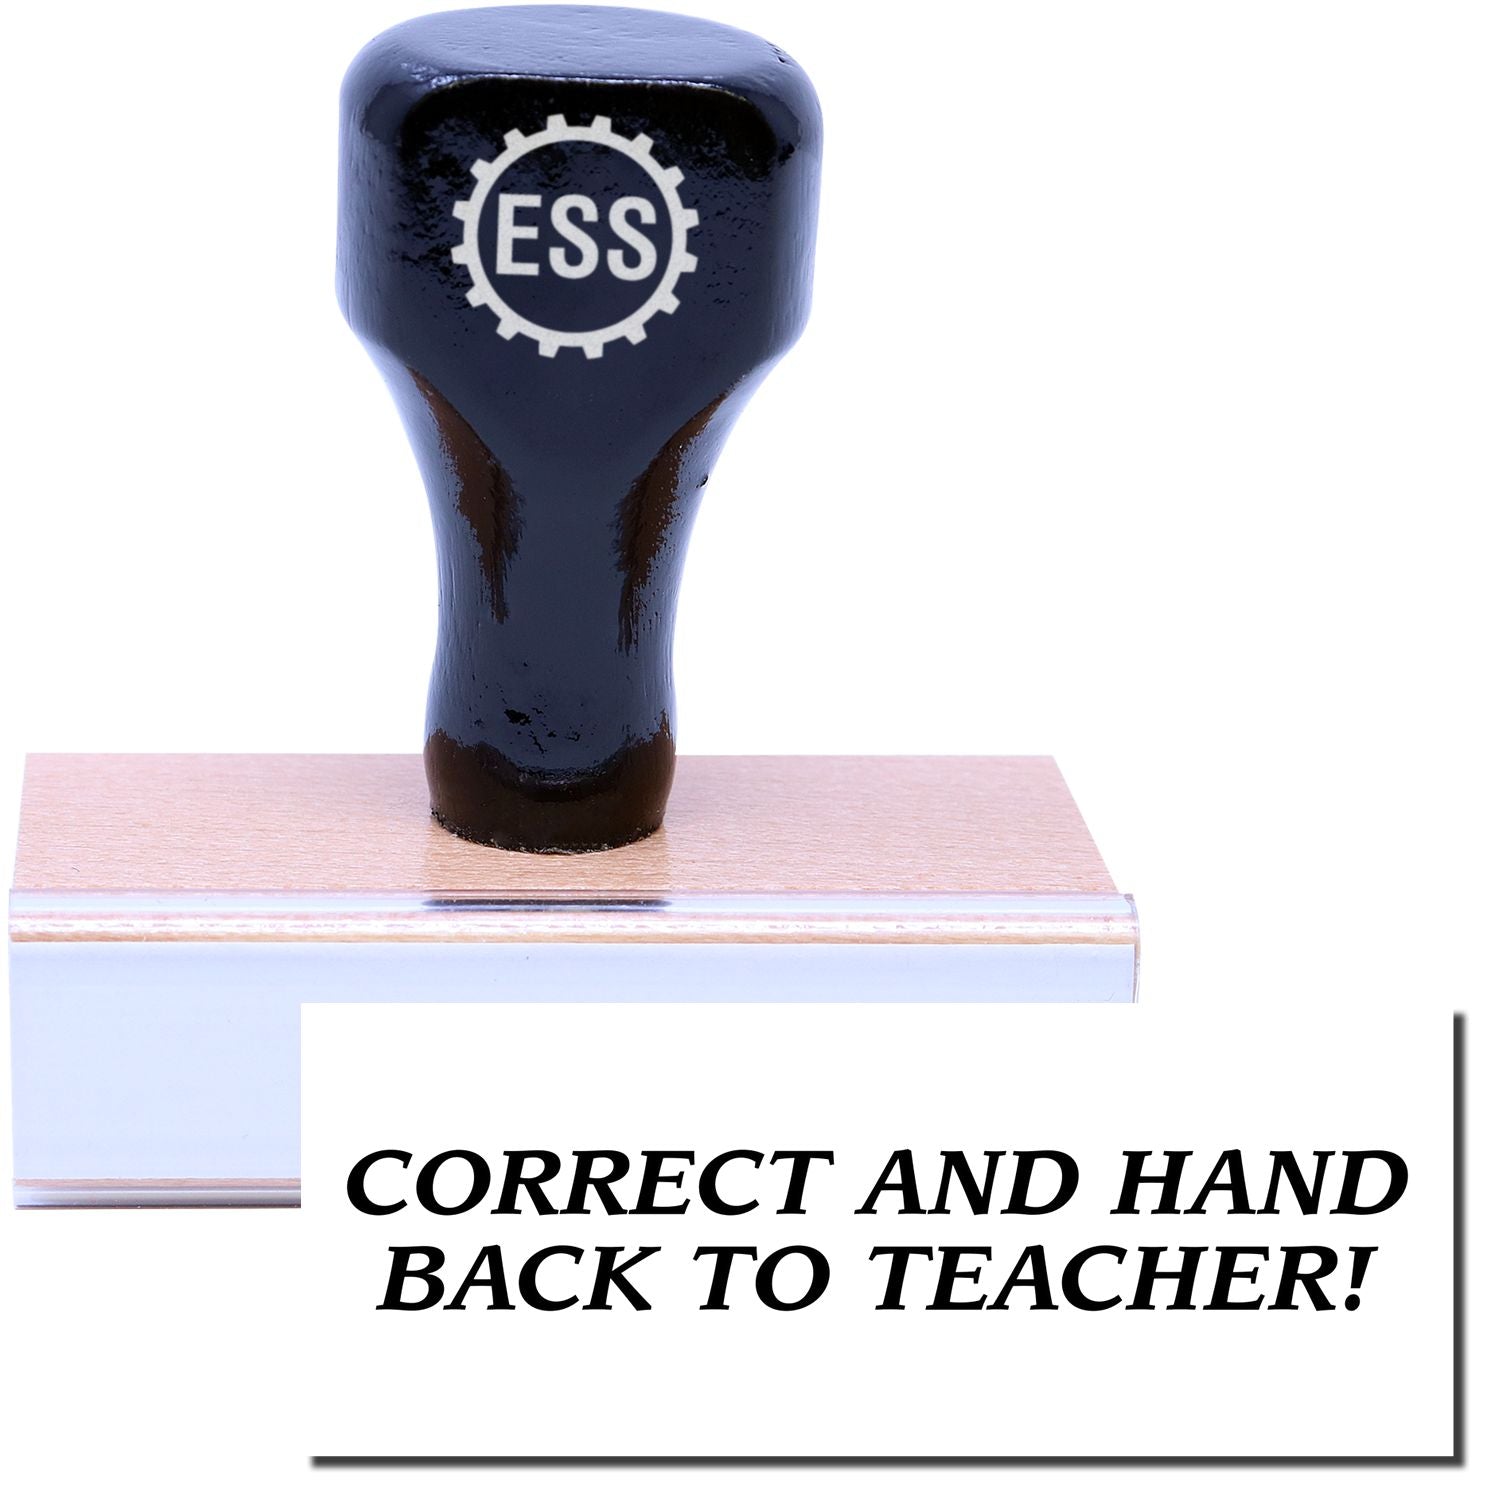 A stock office rubber stamp with a stamped image showing how the text "CORRECT AND HAND BACK TO TEACHER!" is displayed after stamping.